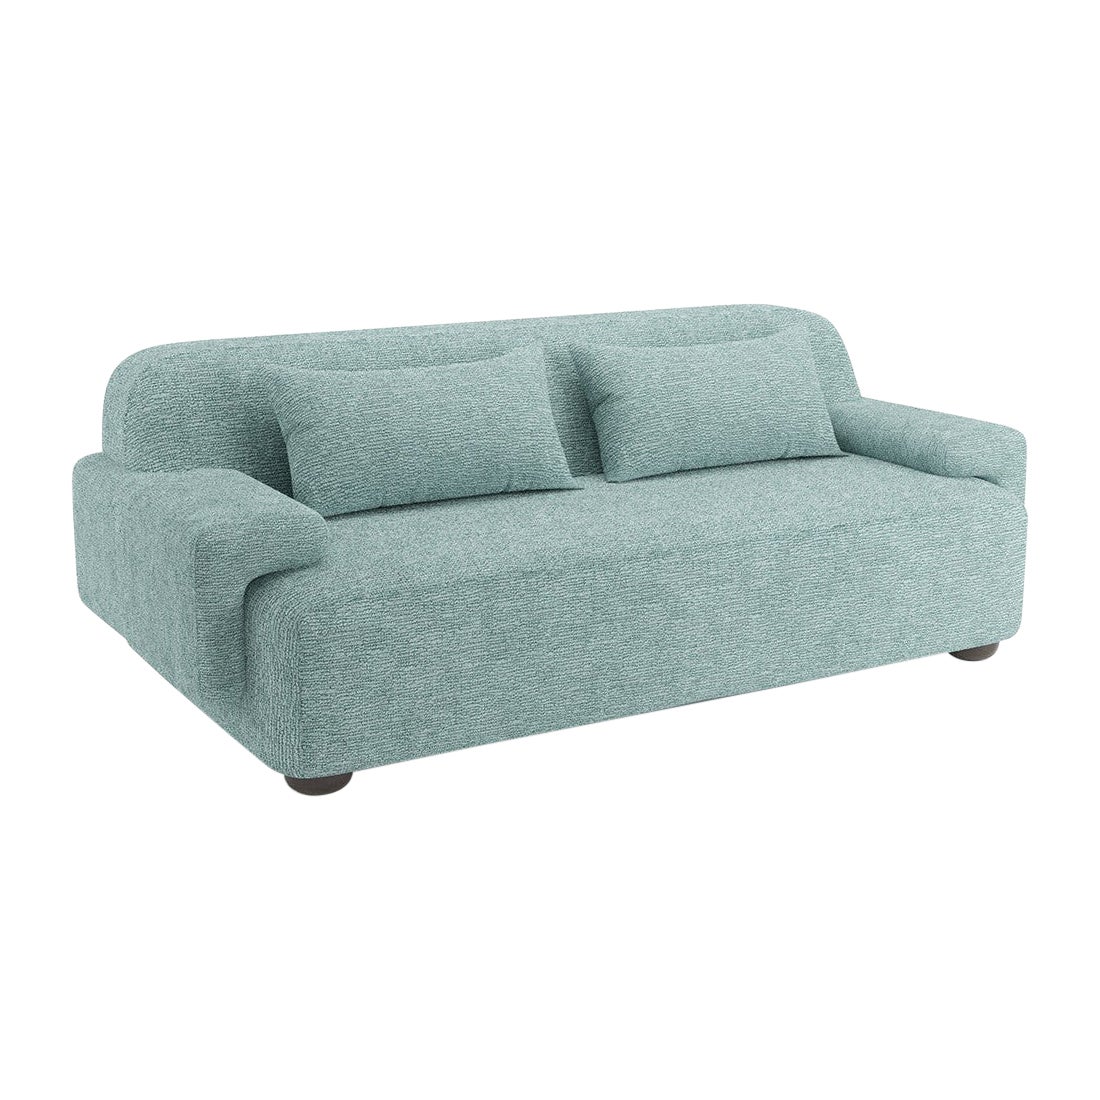 Popus Editions Lena 3 Seater Sofa in Mint Megeve Fabric with Knit Effect For Sale